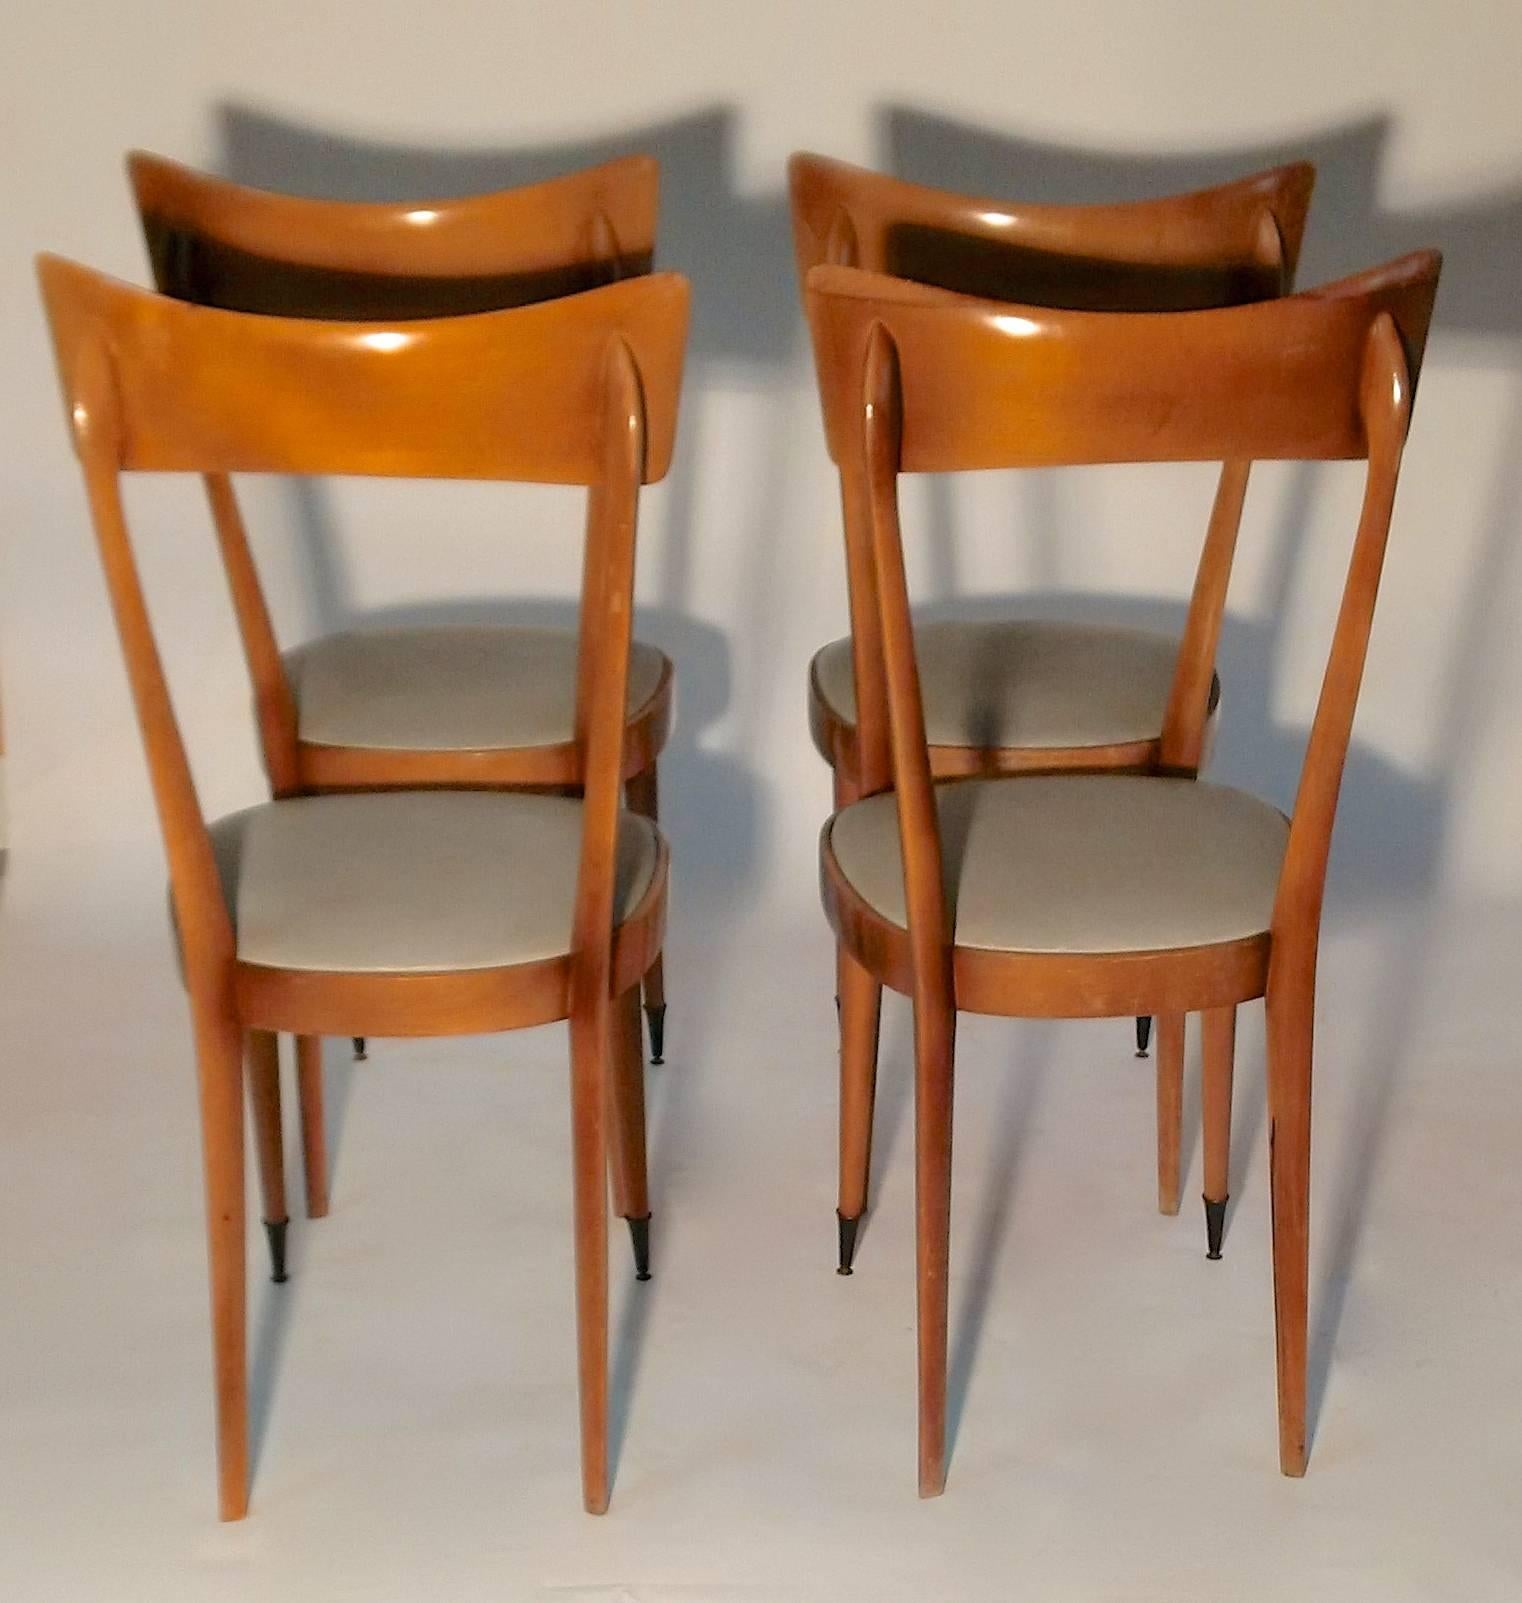 A set of four wooden dining chairs with elegant sculptural design from Milan, circa 1950.
The front legs have brass tipped feet and the seating is in a light grey /green faux leather.